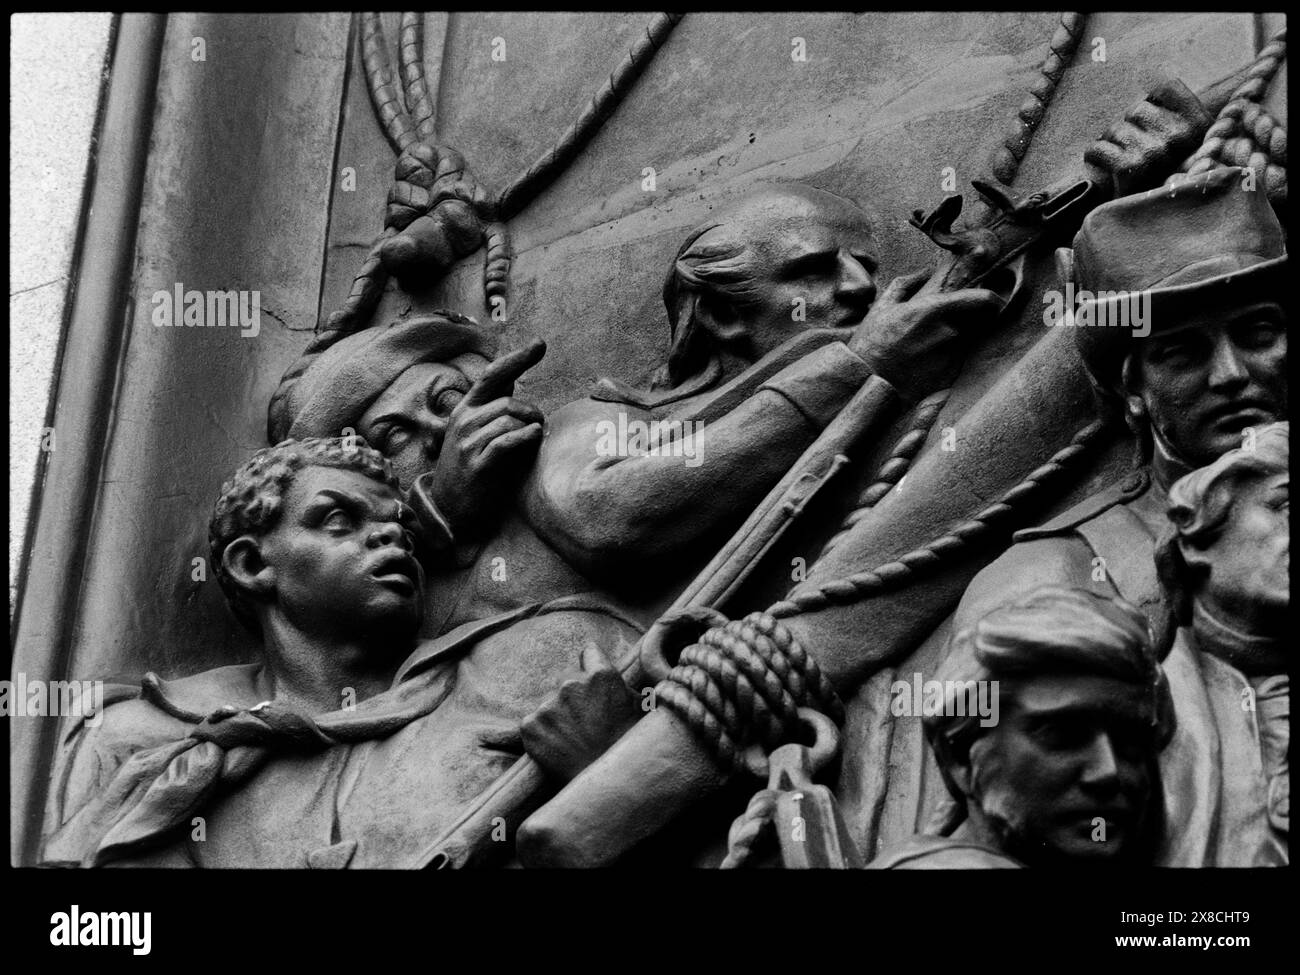 Trafalgar Square London 1993 Base of Nelsons Column showing scenes from the Battle of Trafalgar. The death of Nelson at Trafalgar. The sculptor was by John Edward Carew, Stock Photo